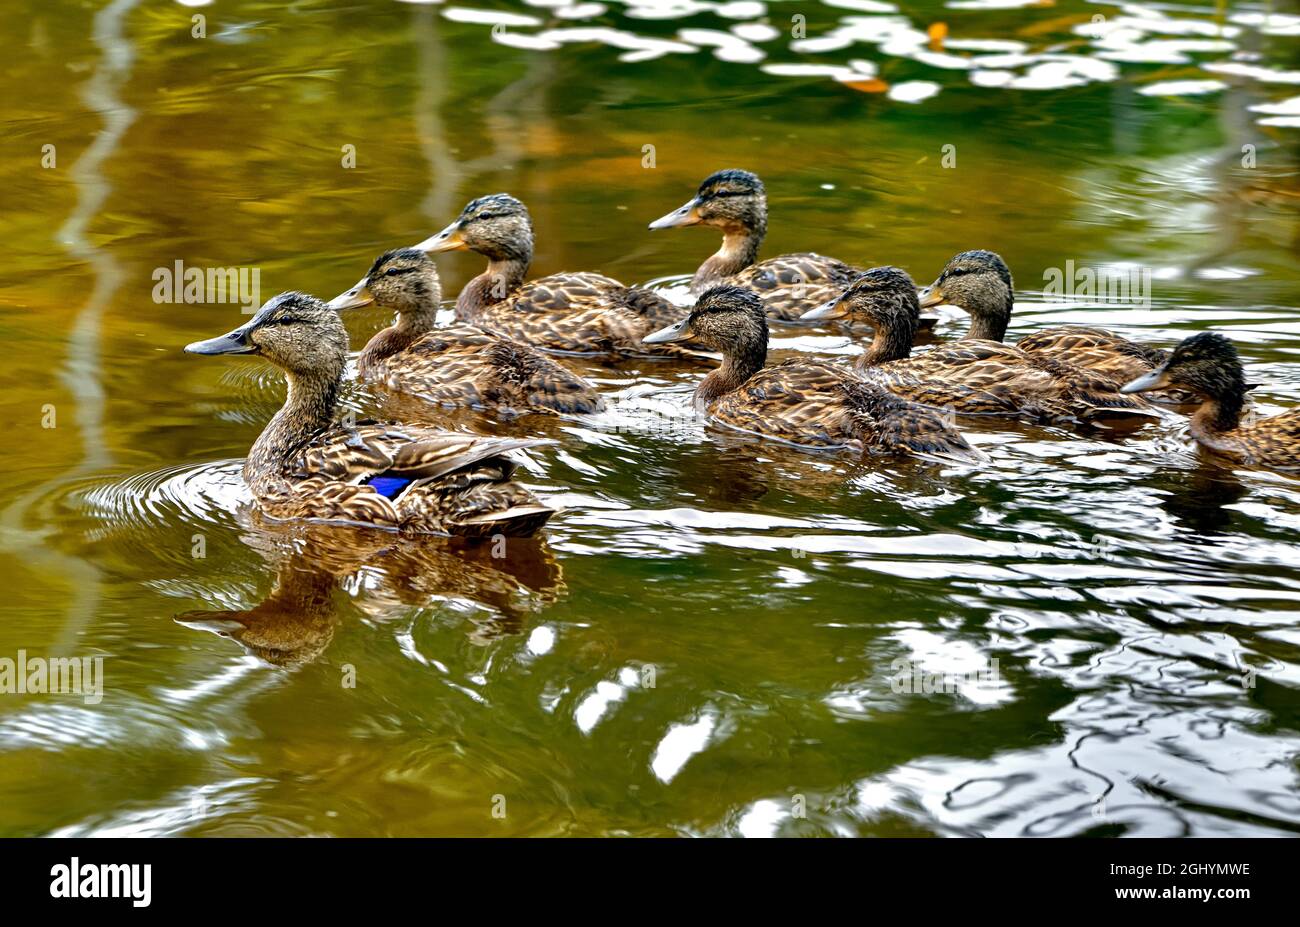 A mother mallard duck (Anas platyrhynchos); swims with her flock of grown ducklings in a marsh area in rural Alberta Canada. Stock Photo